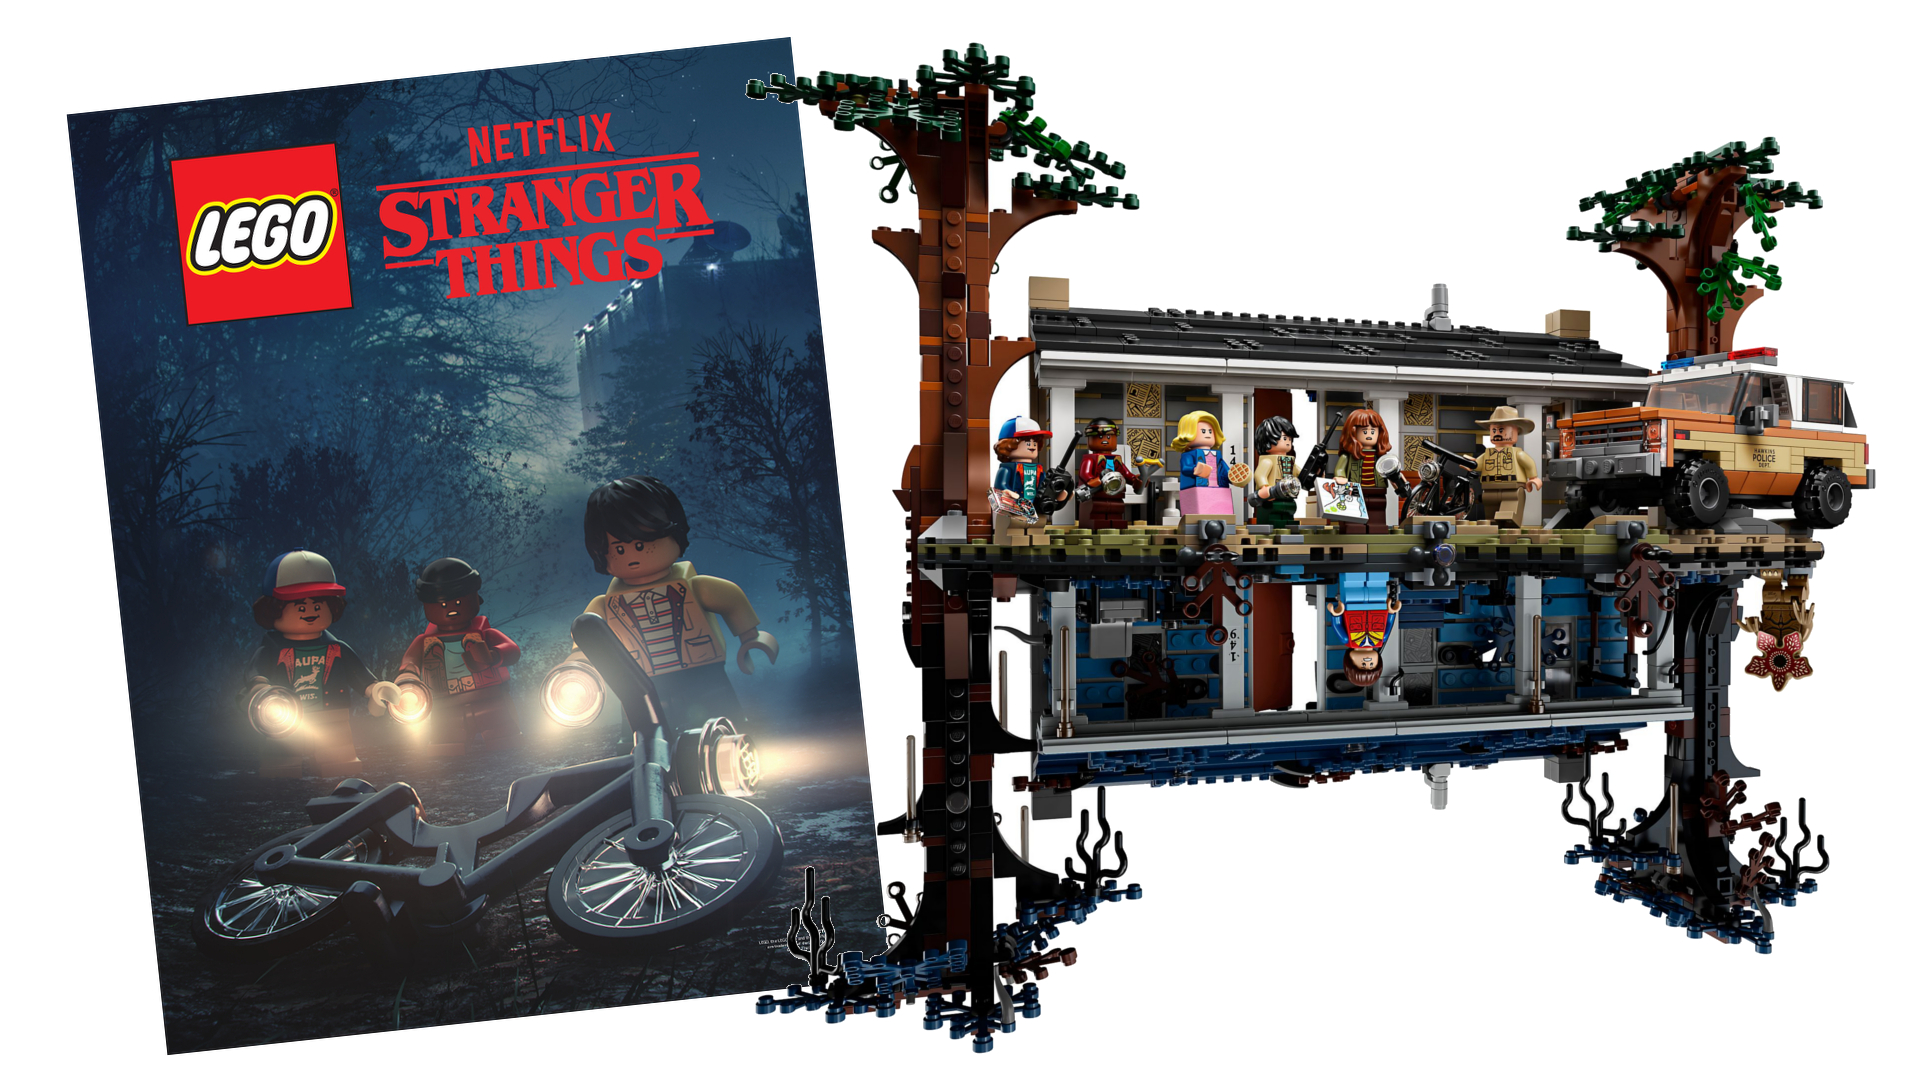 Buy The Amazing Lego Stranger Things Set And Get A Limited Edition